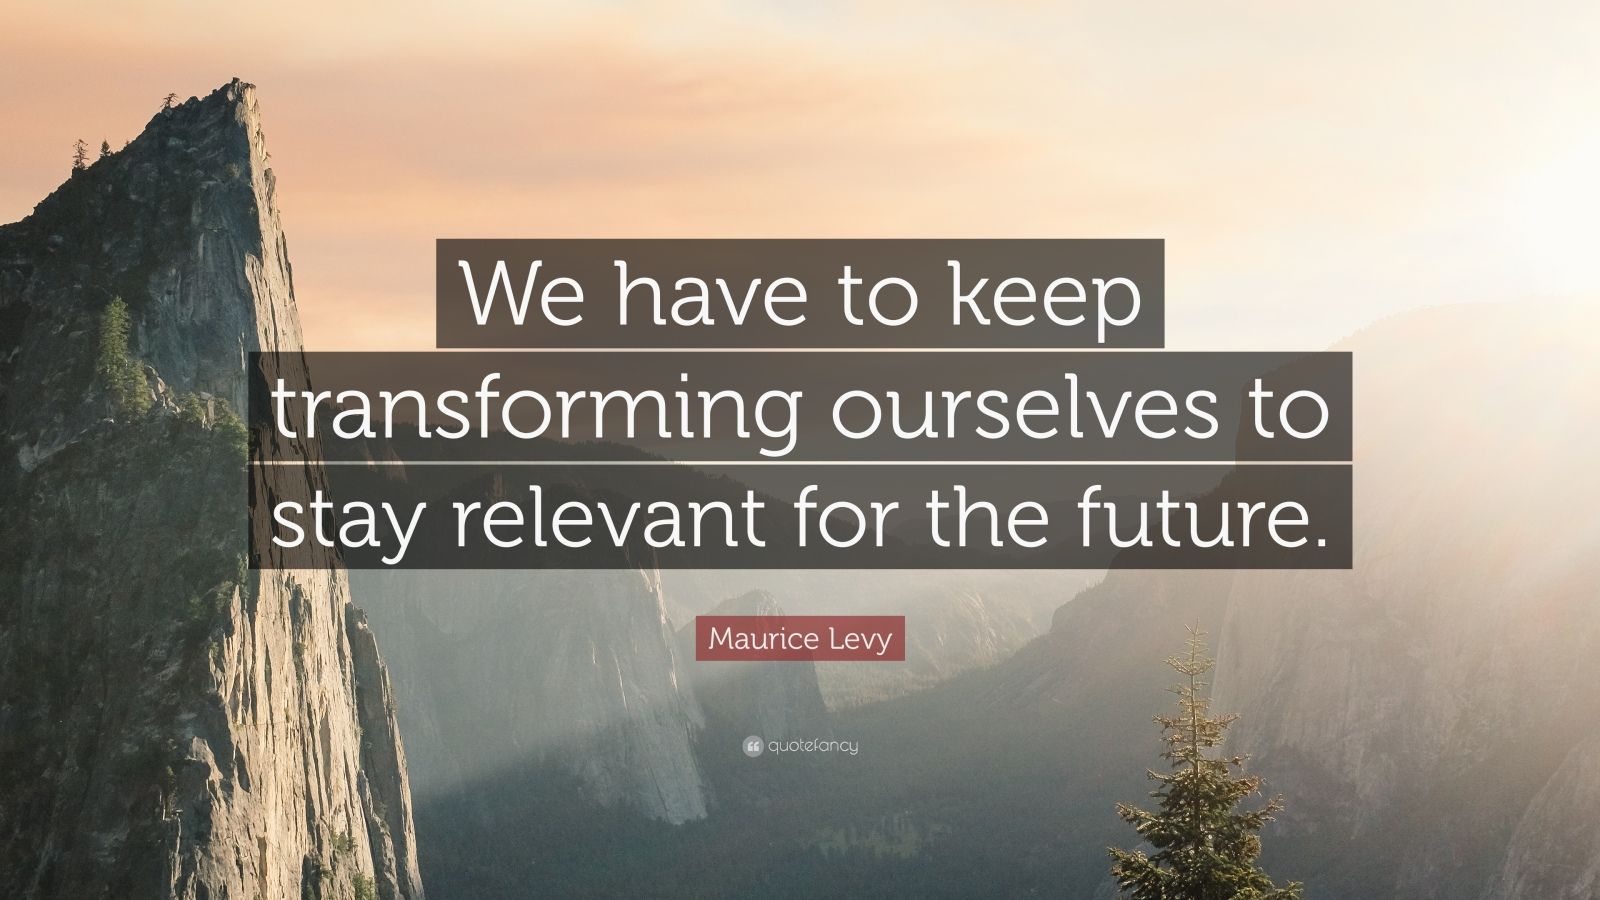 Maurice Levy Quote: “We have to keep transforming ourselves to stay